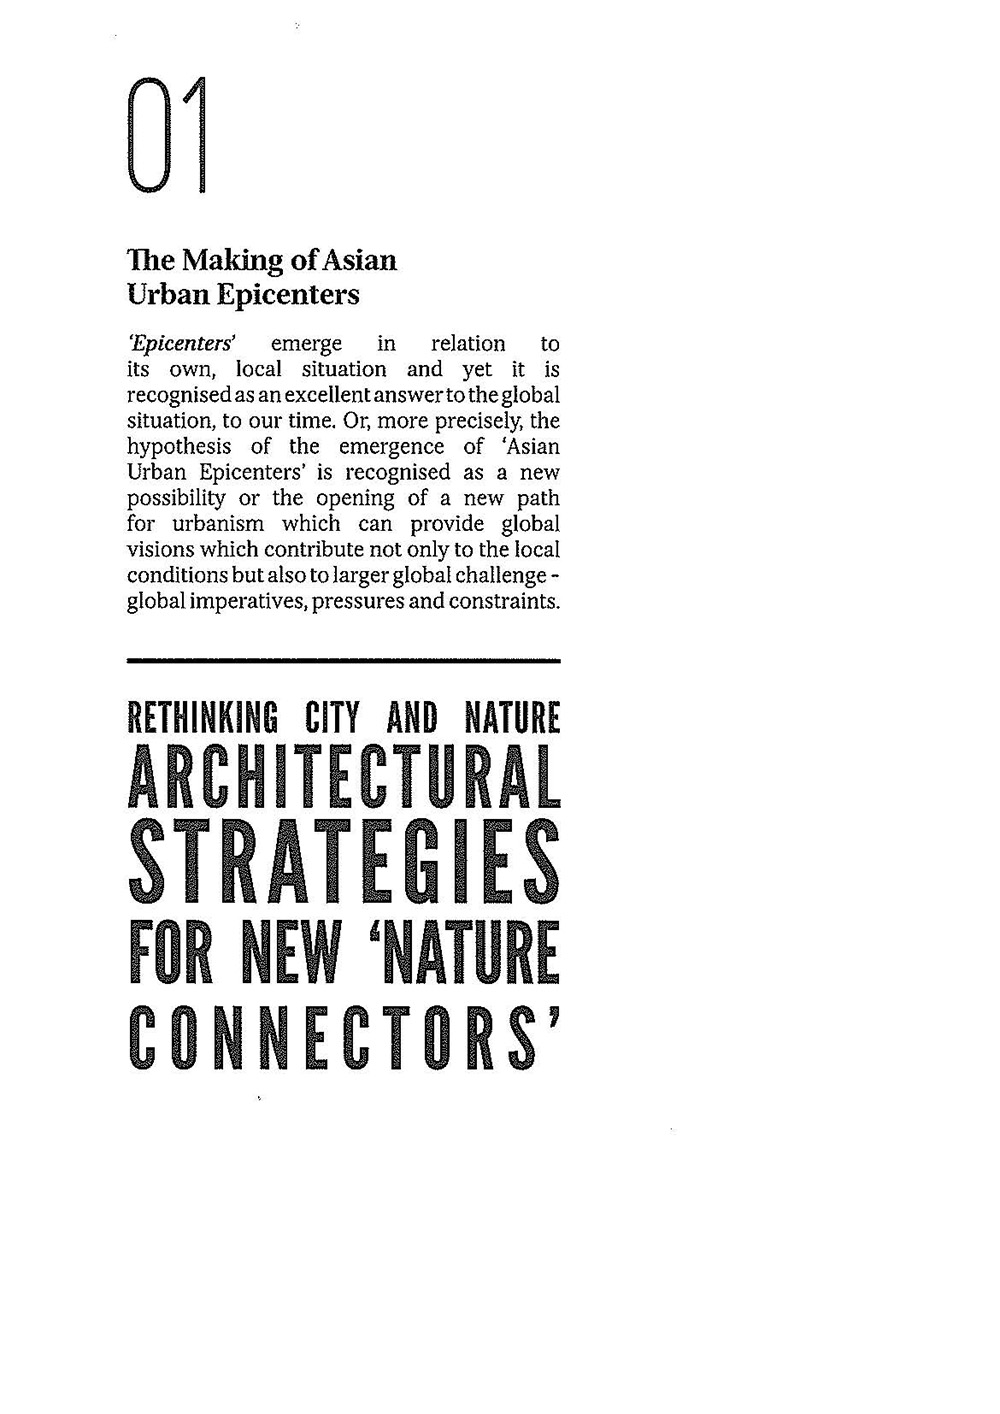 The Making of Asian Urban Epicenters: Rethinking City and Nature Architectural Strategies for New 'Nature Connectors'